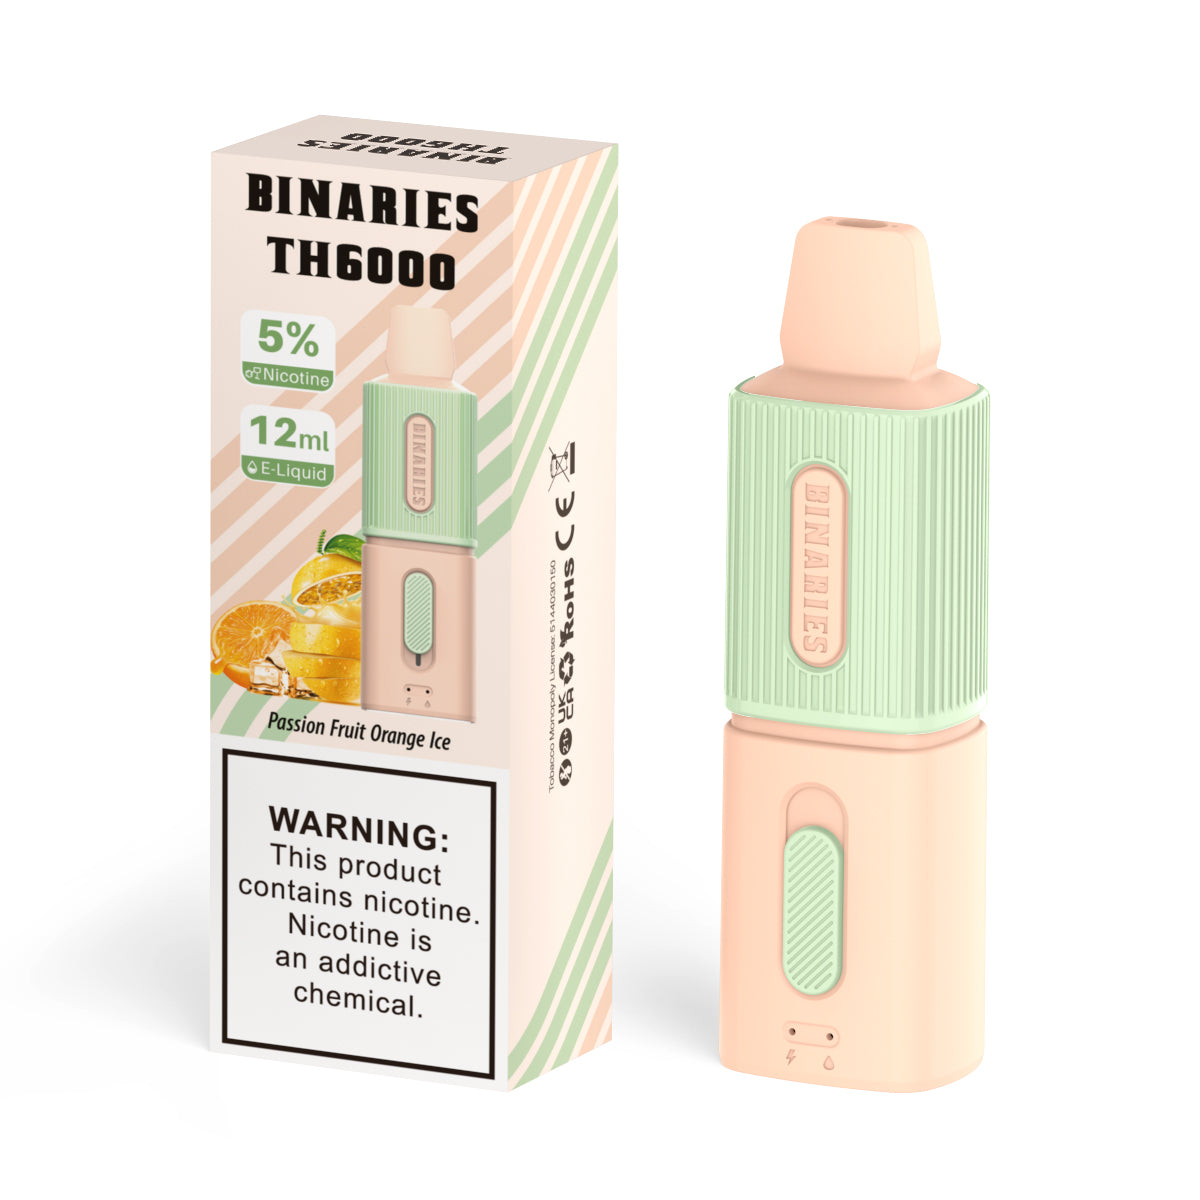 Binaries Cabin Disposable TH | 6000 Puffs | 12mL | 50mg Passion Fruit Orange Ice with Packaging